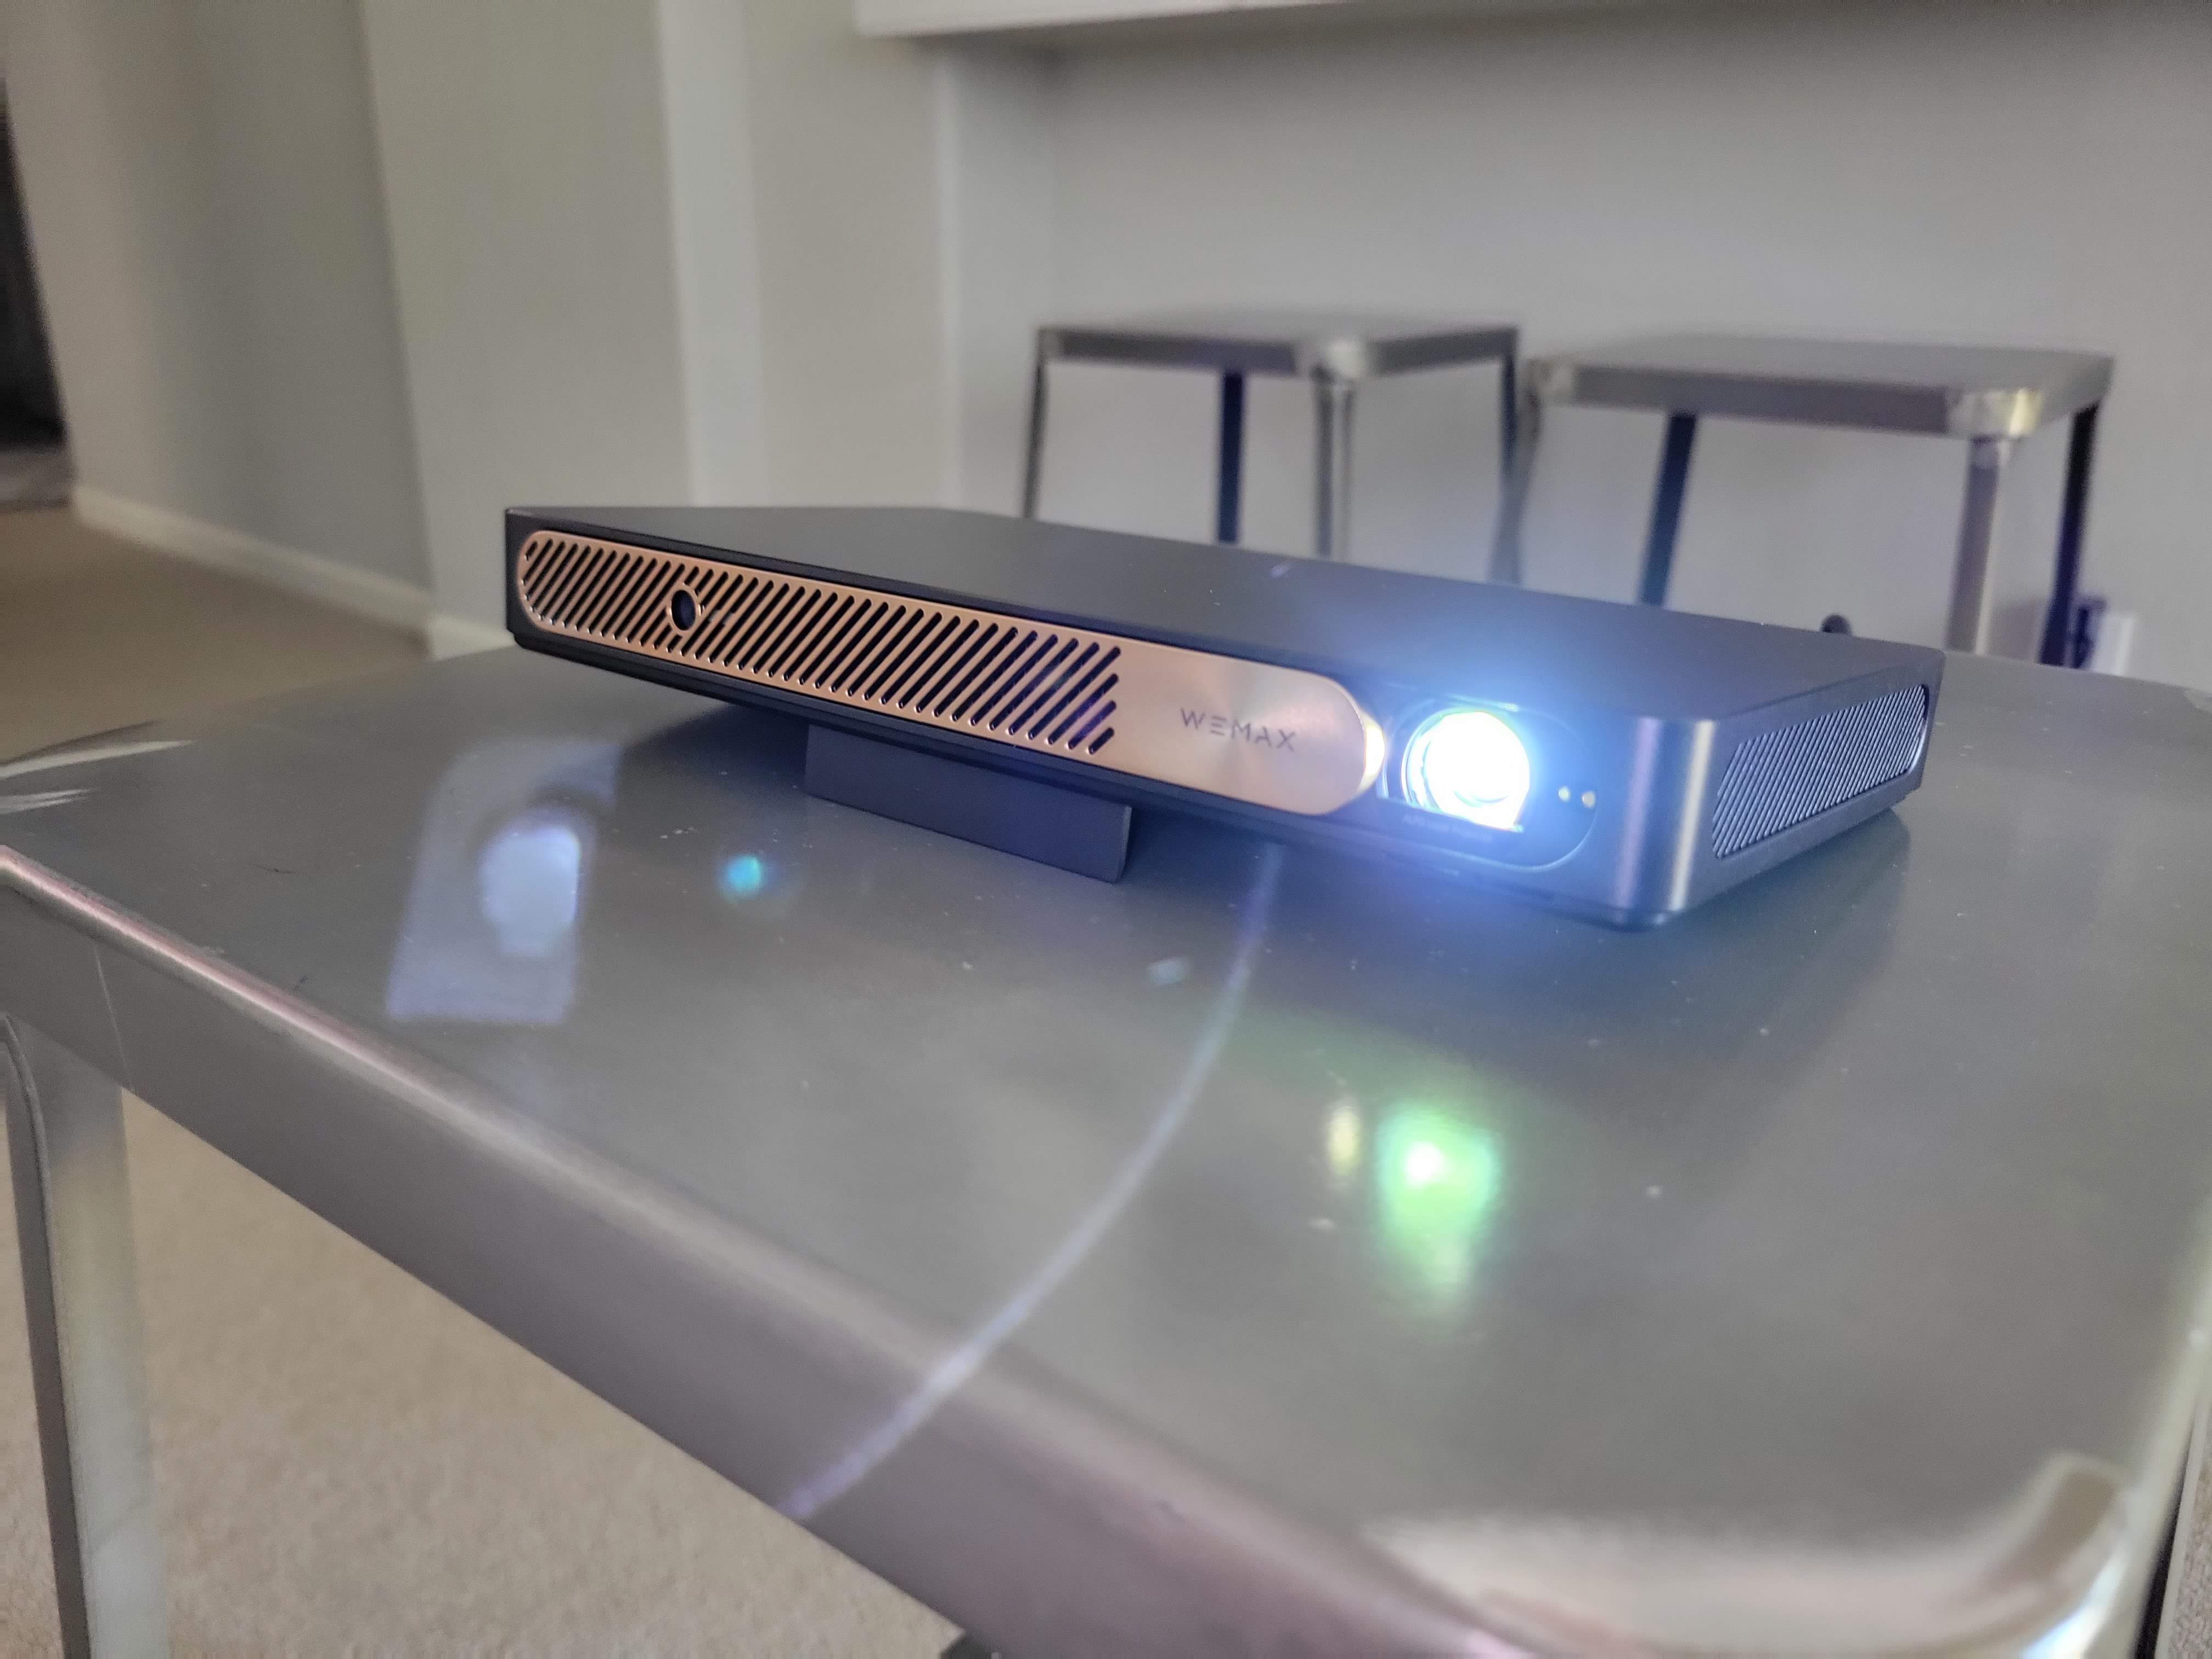 Wemax Go Advanced Laser Projector Unboxing and Initial Hands-On